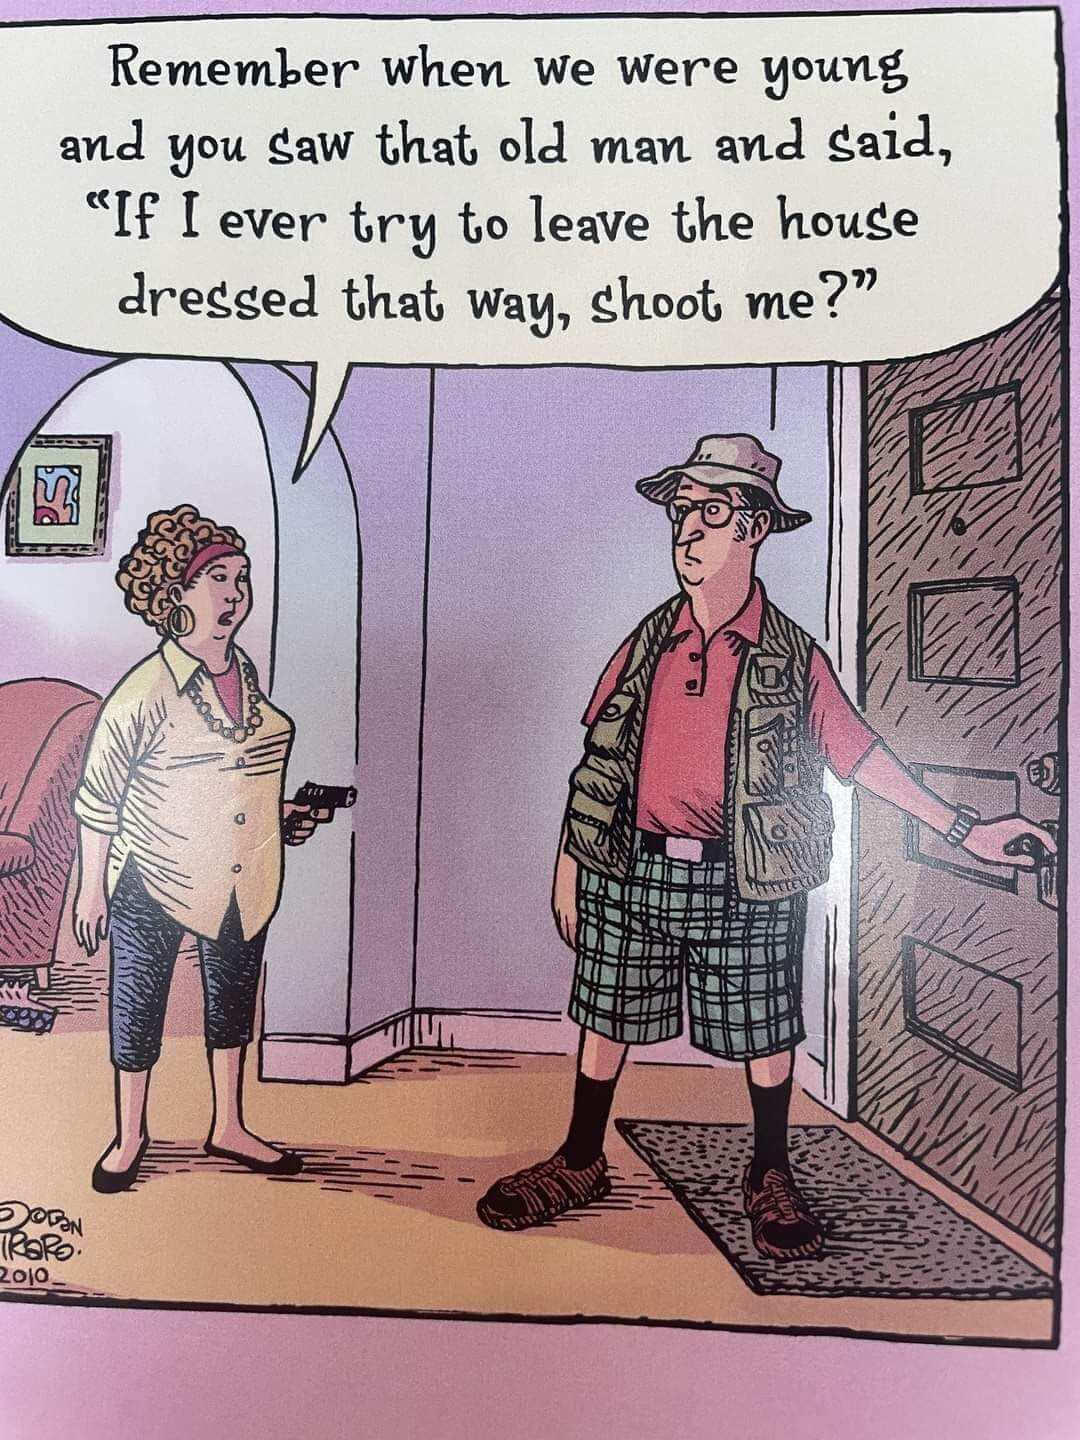 Cartoon showing wife condemning how husband is dressed